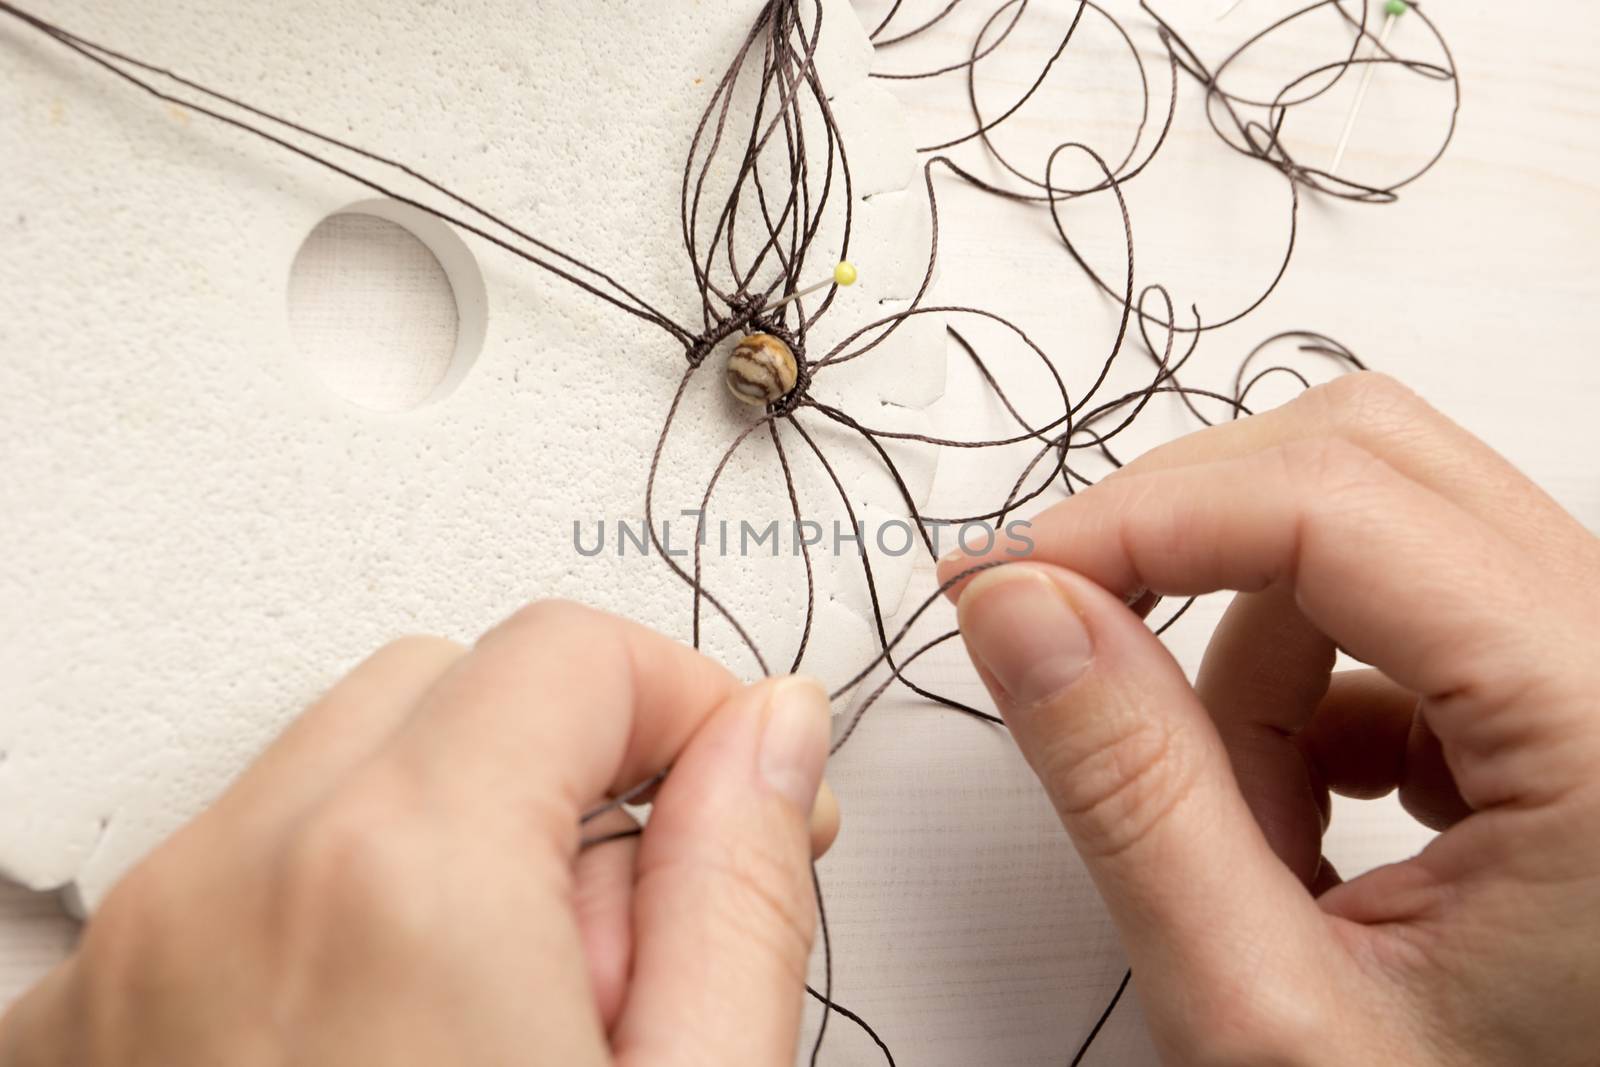 Lifestyle concept, reinvent your life and your job: close-up detail of woman hands making macrame knotted jewel with the fingers that tie the nylon thread around the diaspro natural stone